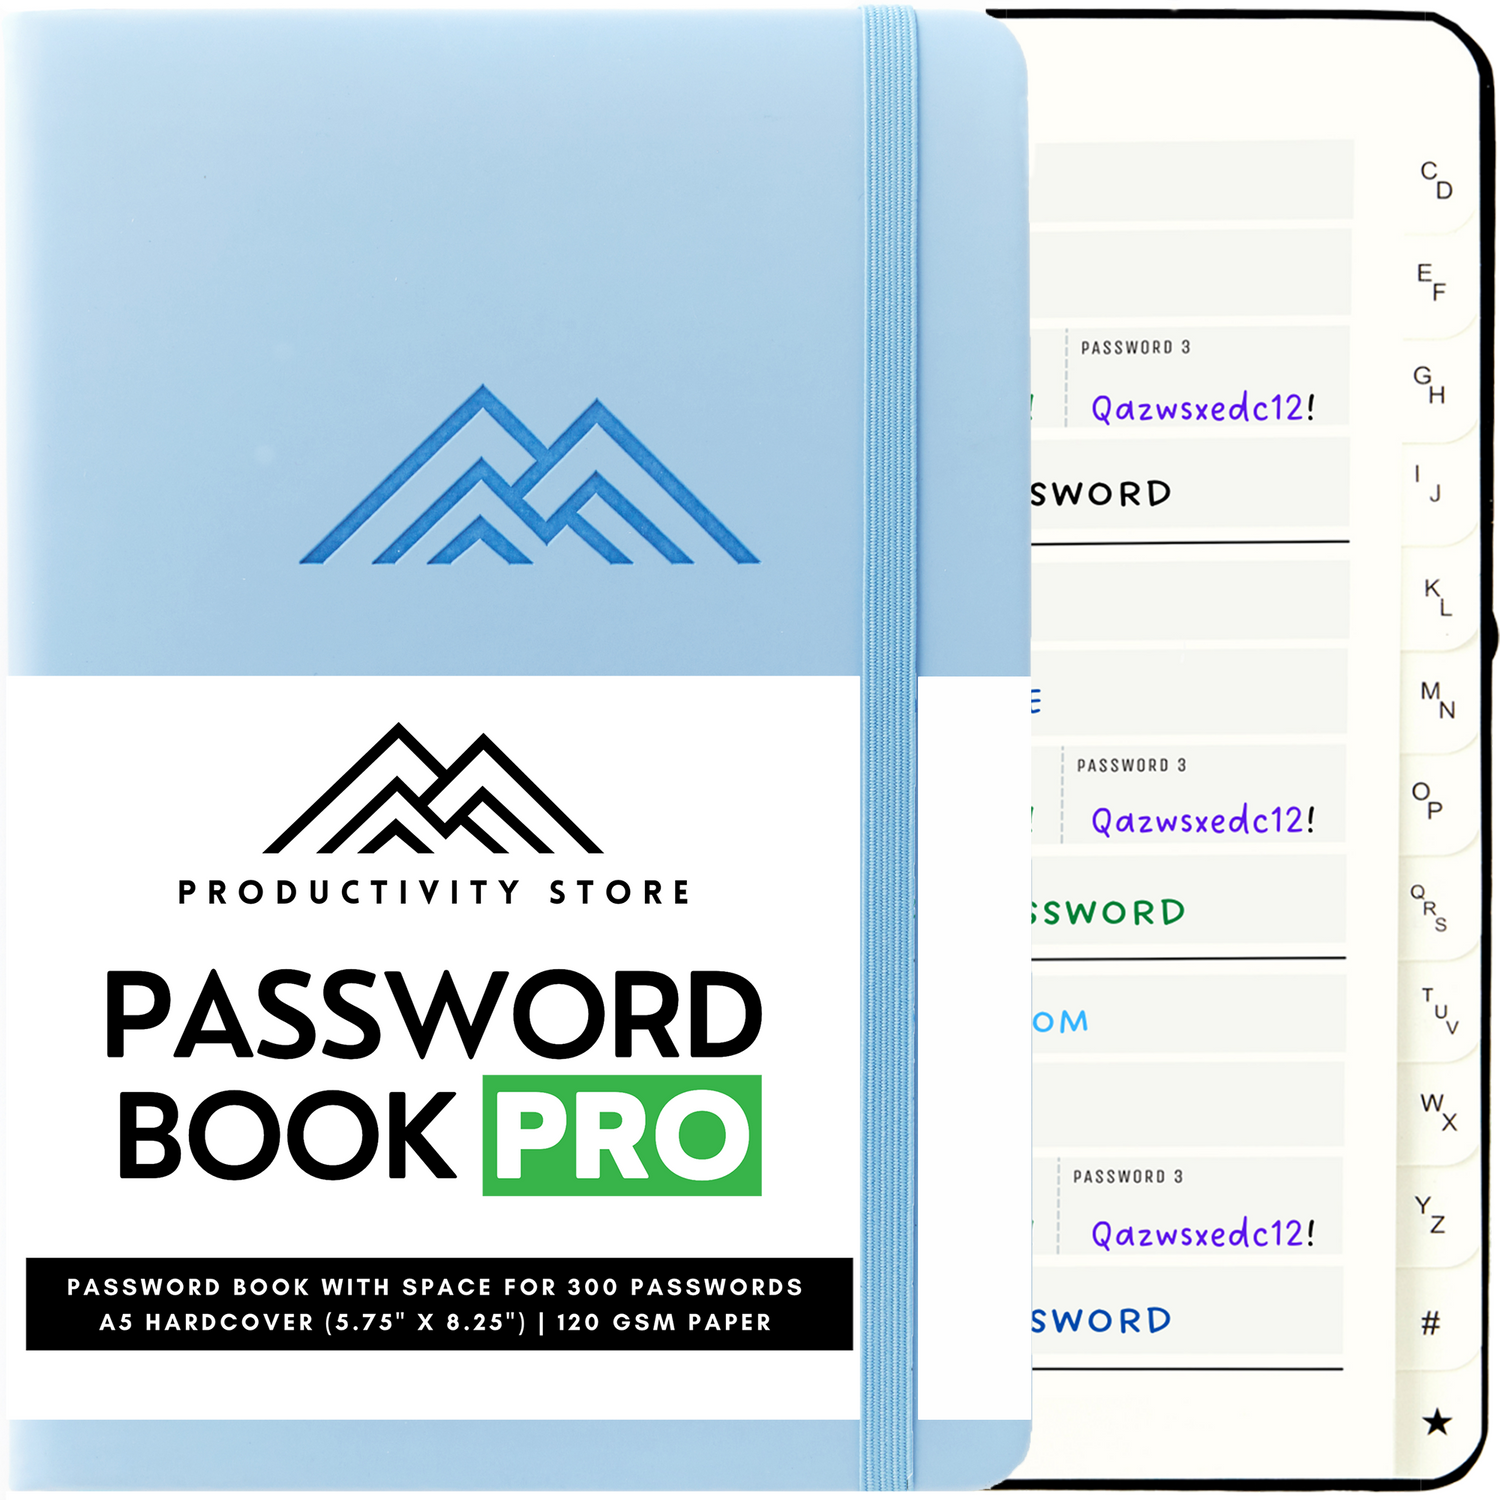 Organization Made Easy: Tips for Effectively Managing Passwords